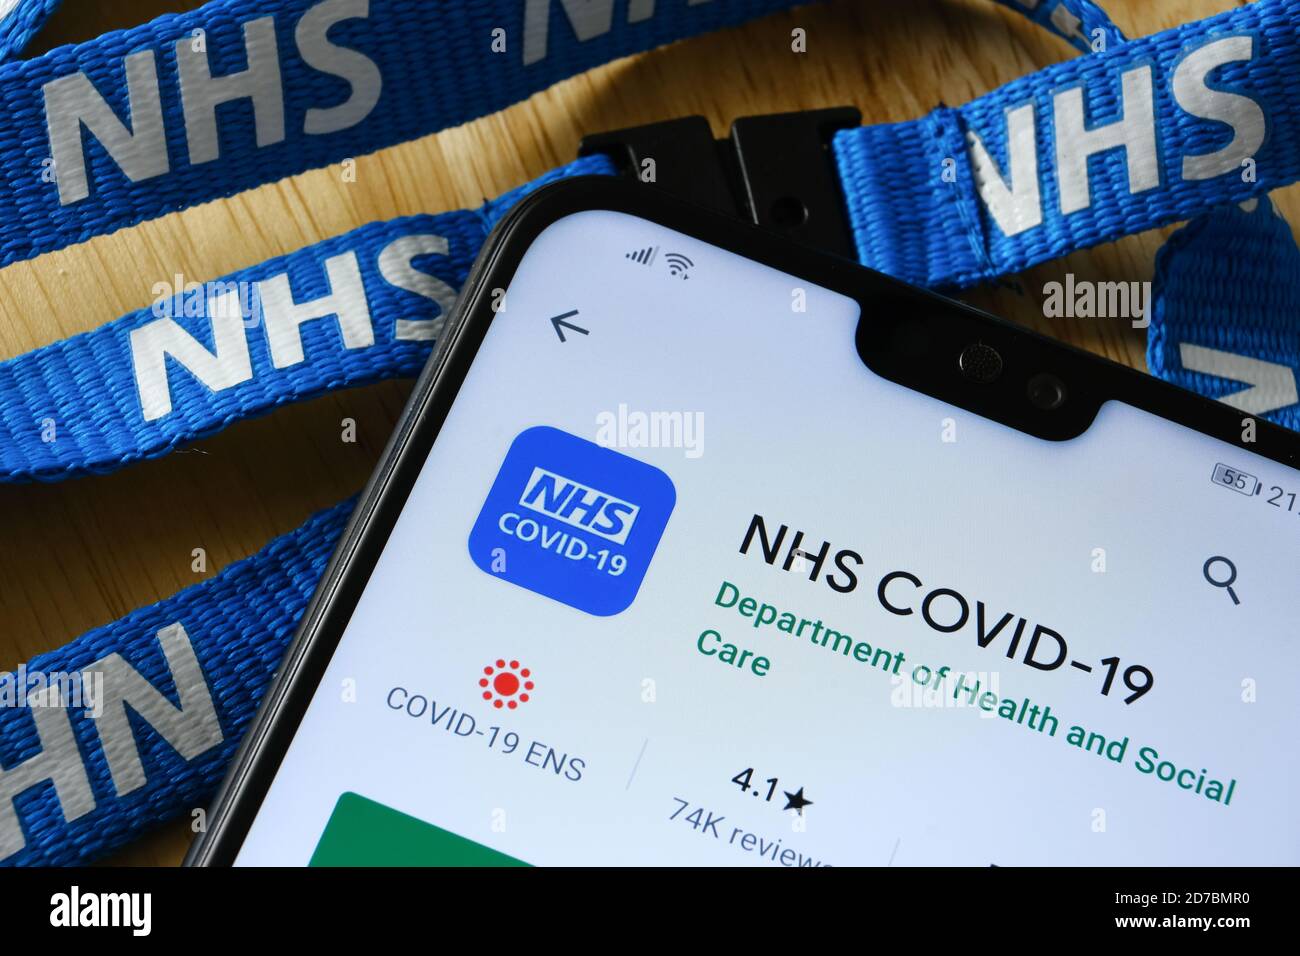 Manchester / United Kingdom - October 21, 2020: NHS COVID-19 app seen in Play Store on the screen of smartphone next to NHS lanyard. Stock Photo